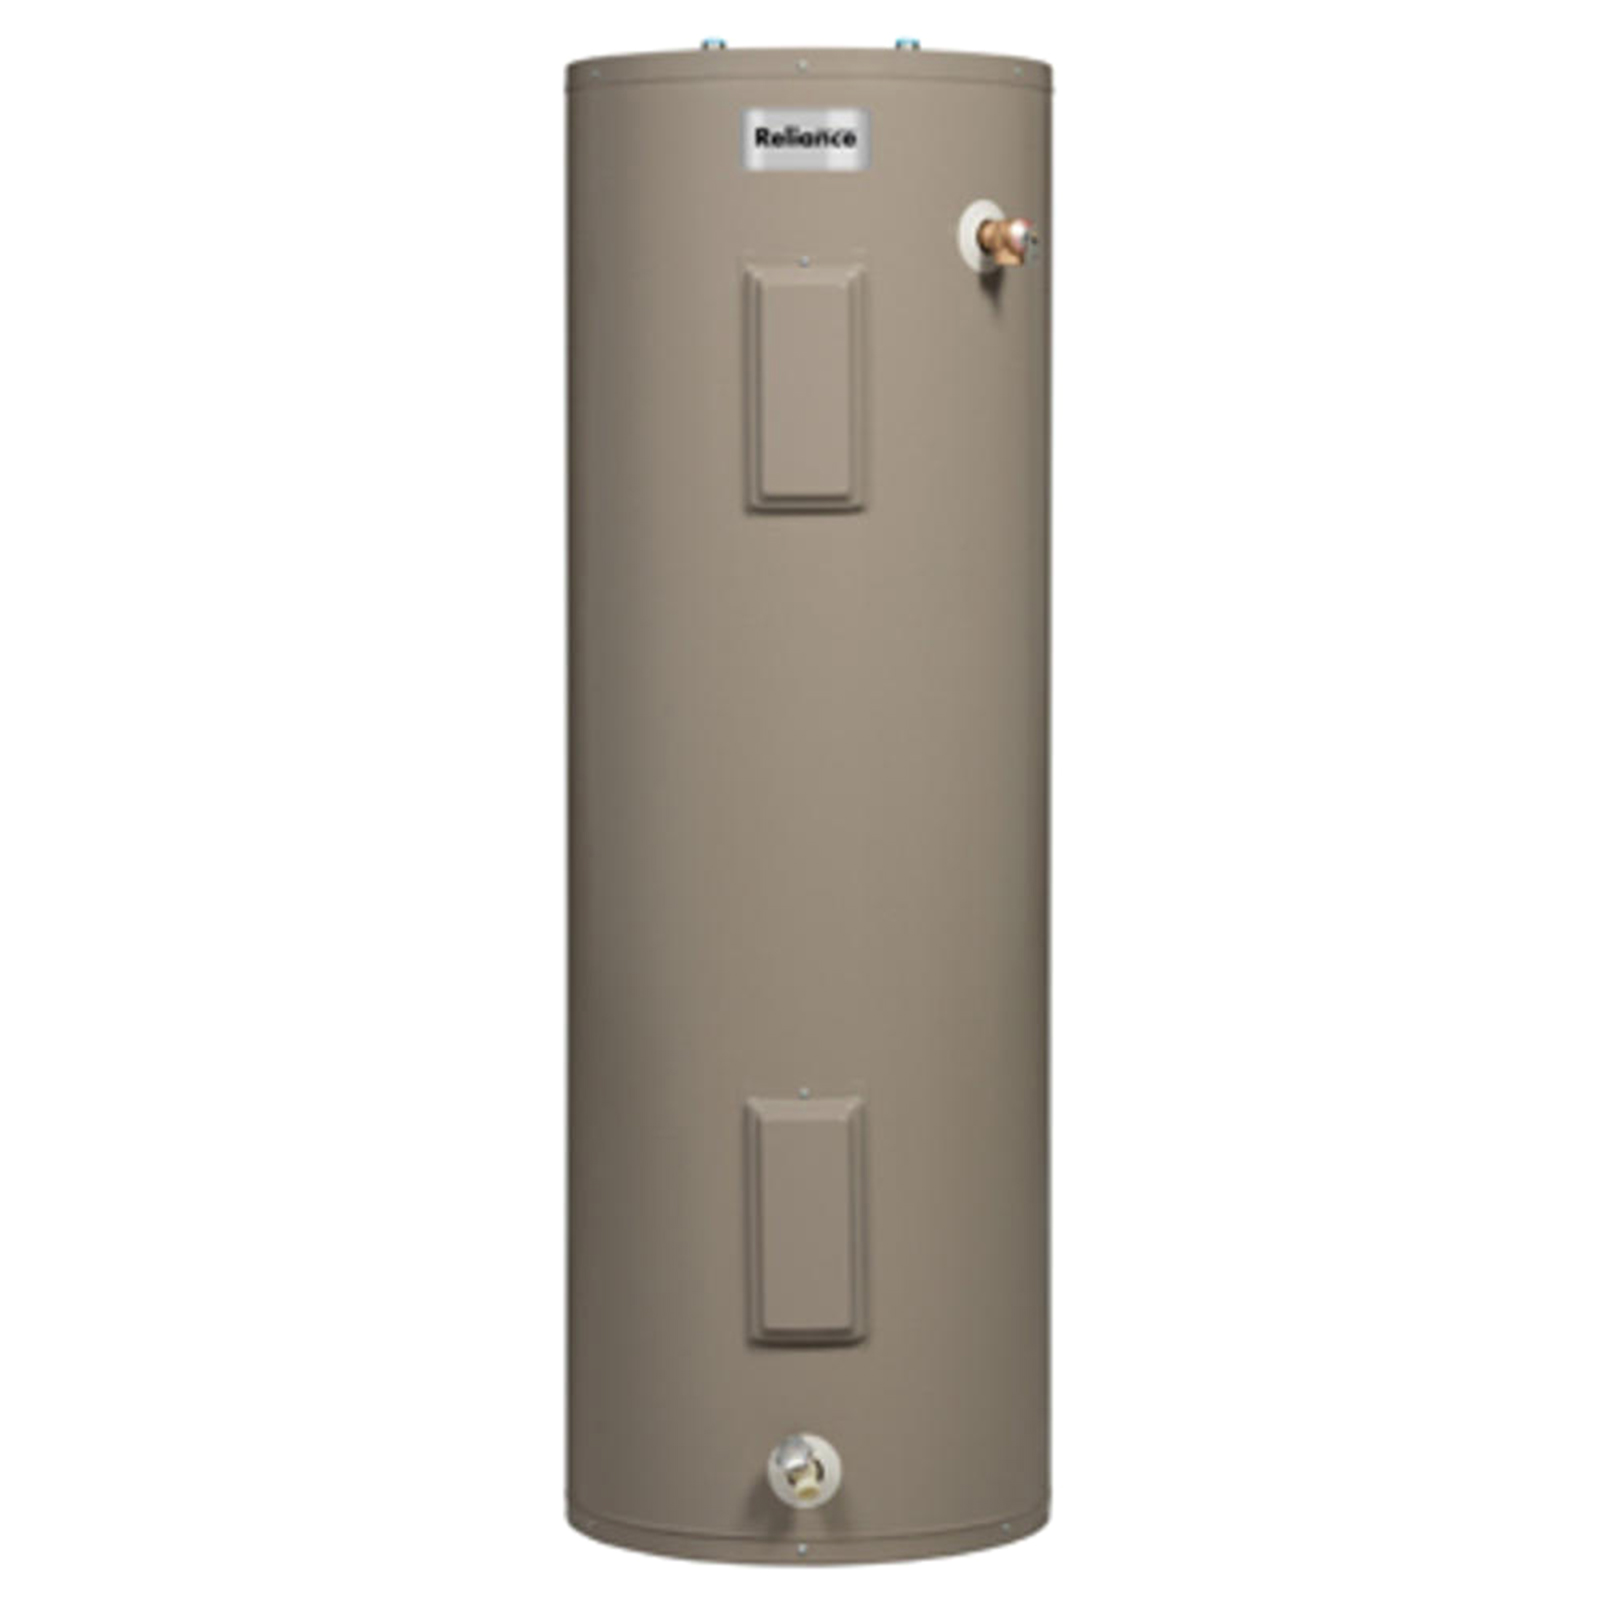 Reliance 195200 640EORT 40-Gallon Electric Water Heater